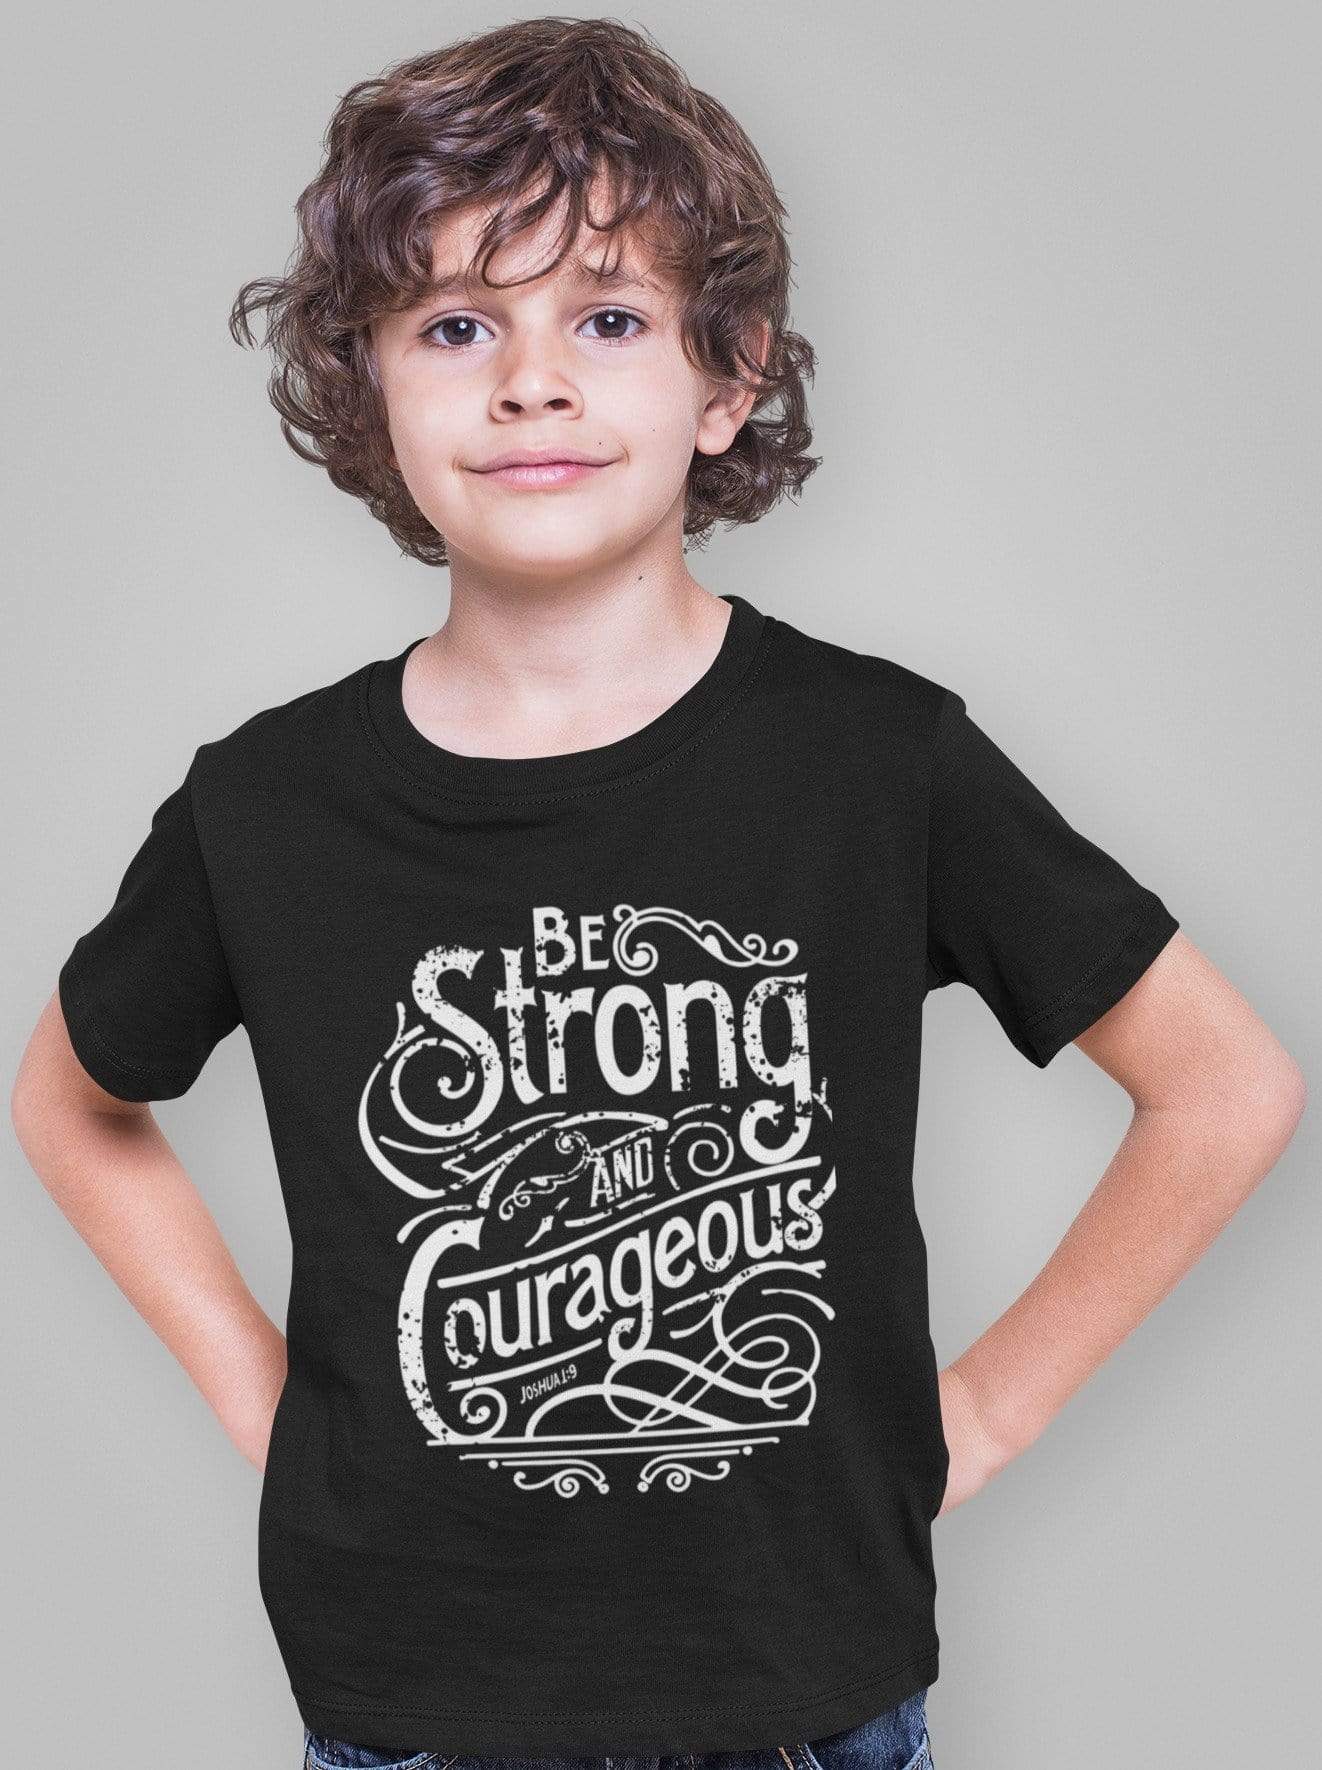 Living Words Kids Round Neck T Shirt Boy / 0-12 Mn / Black Be strong